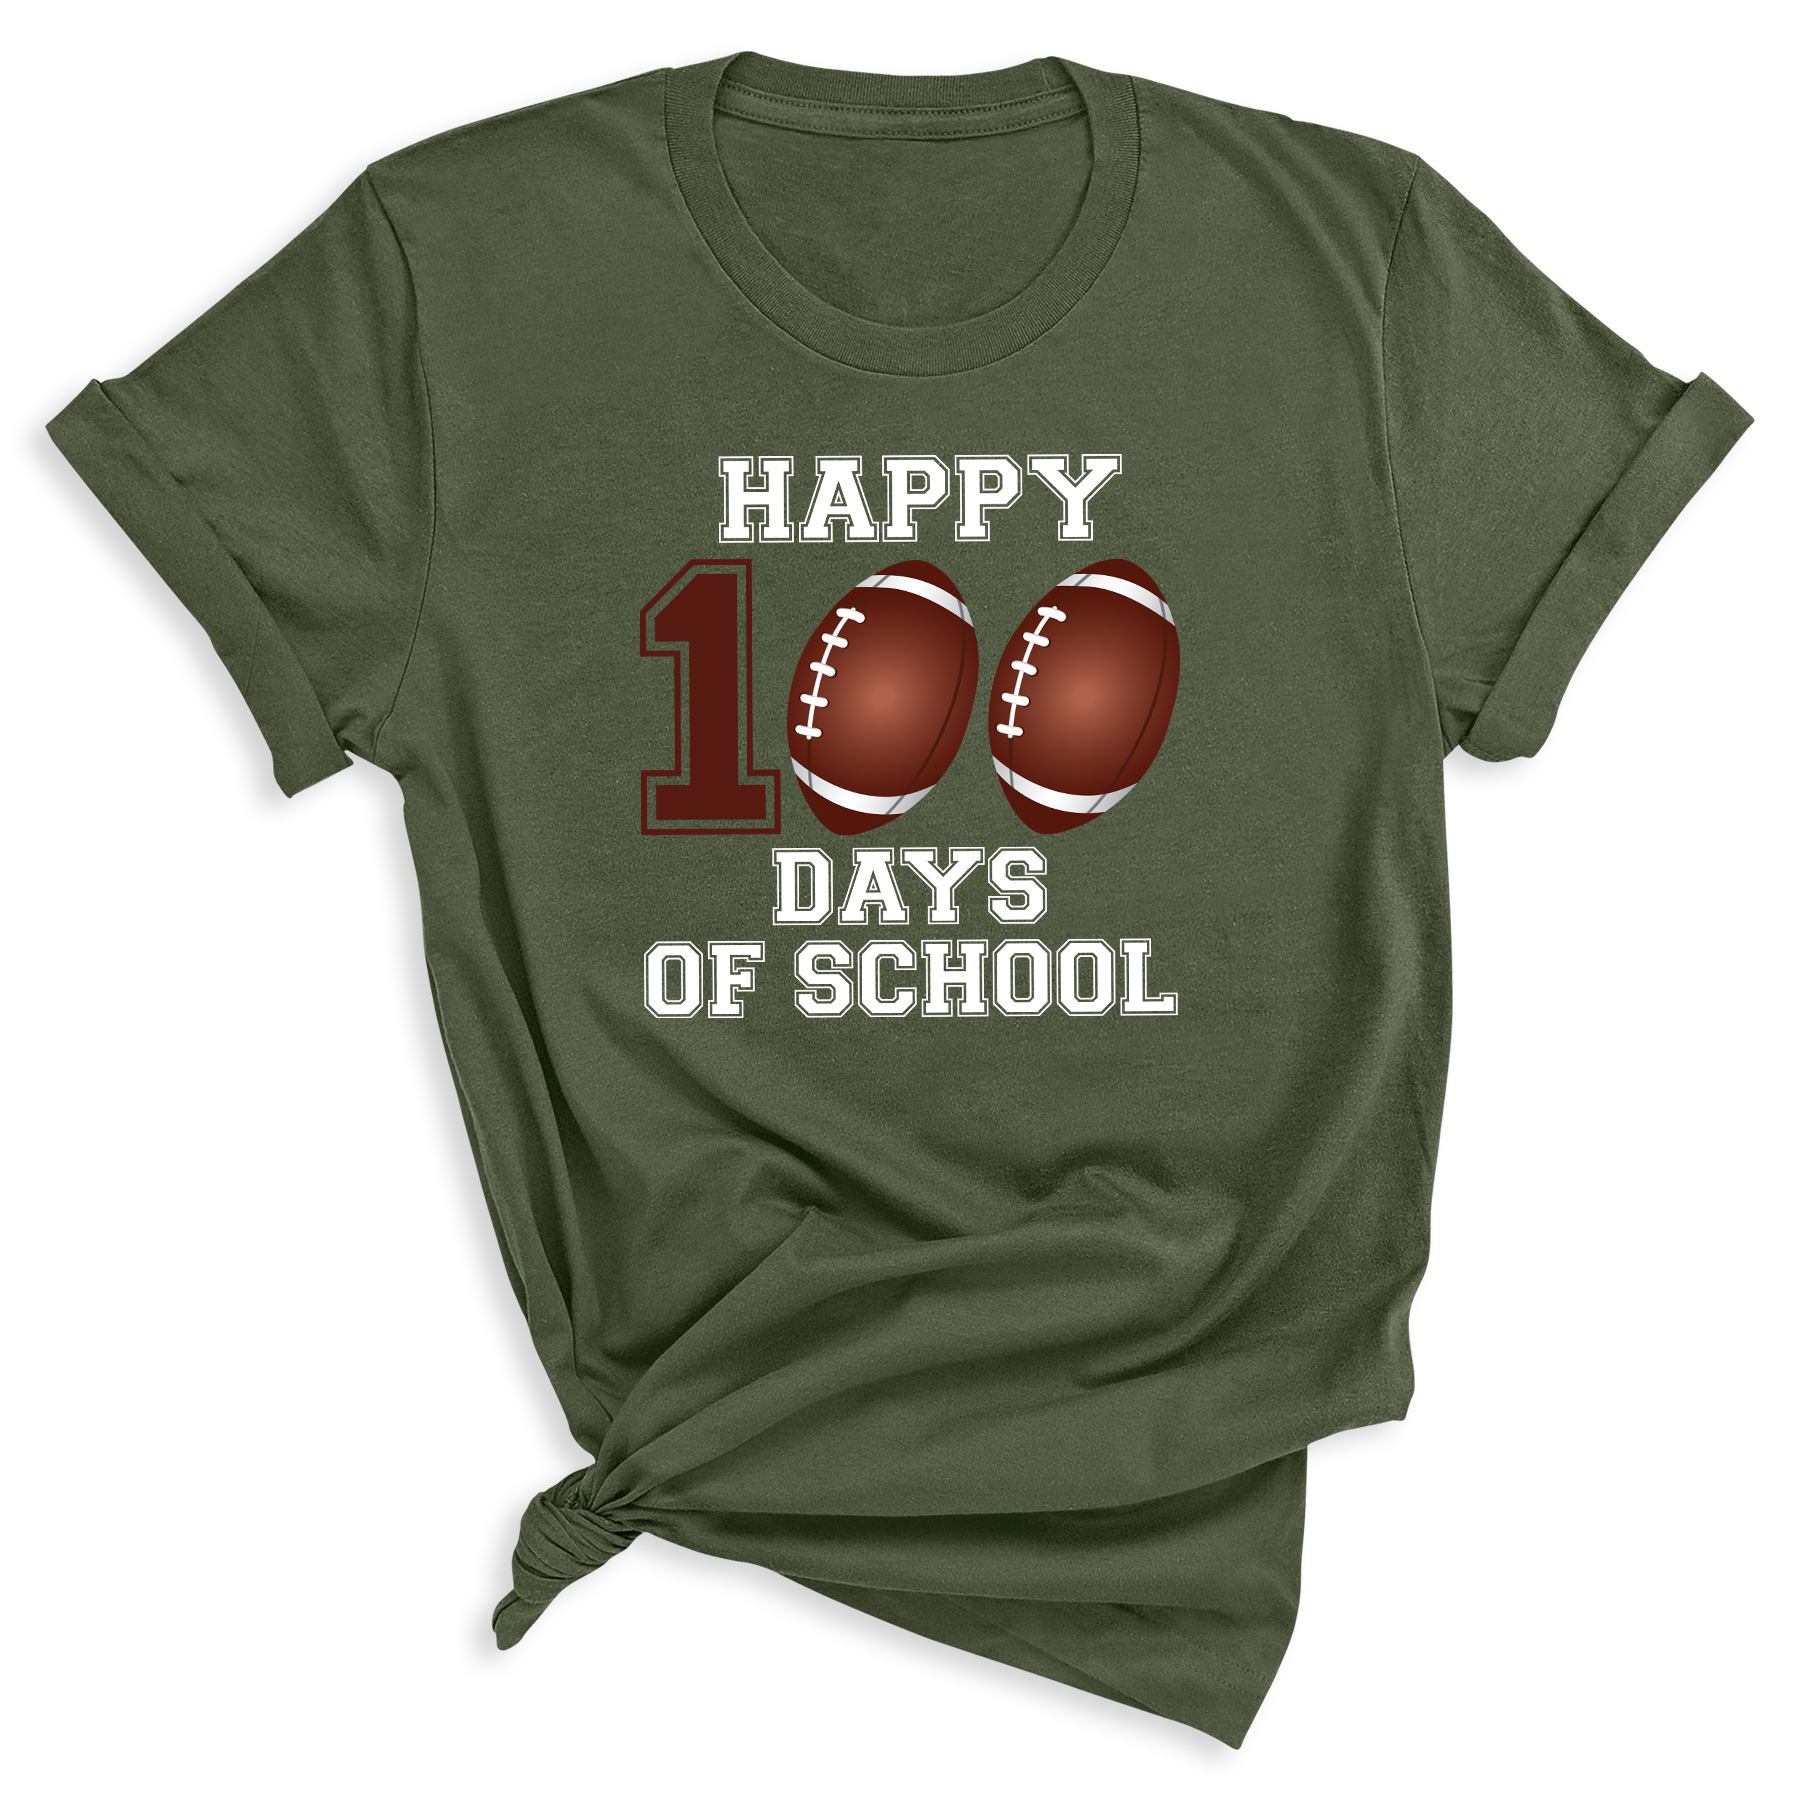 happy 100th day t-shirt